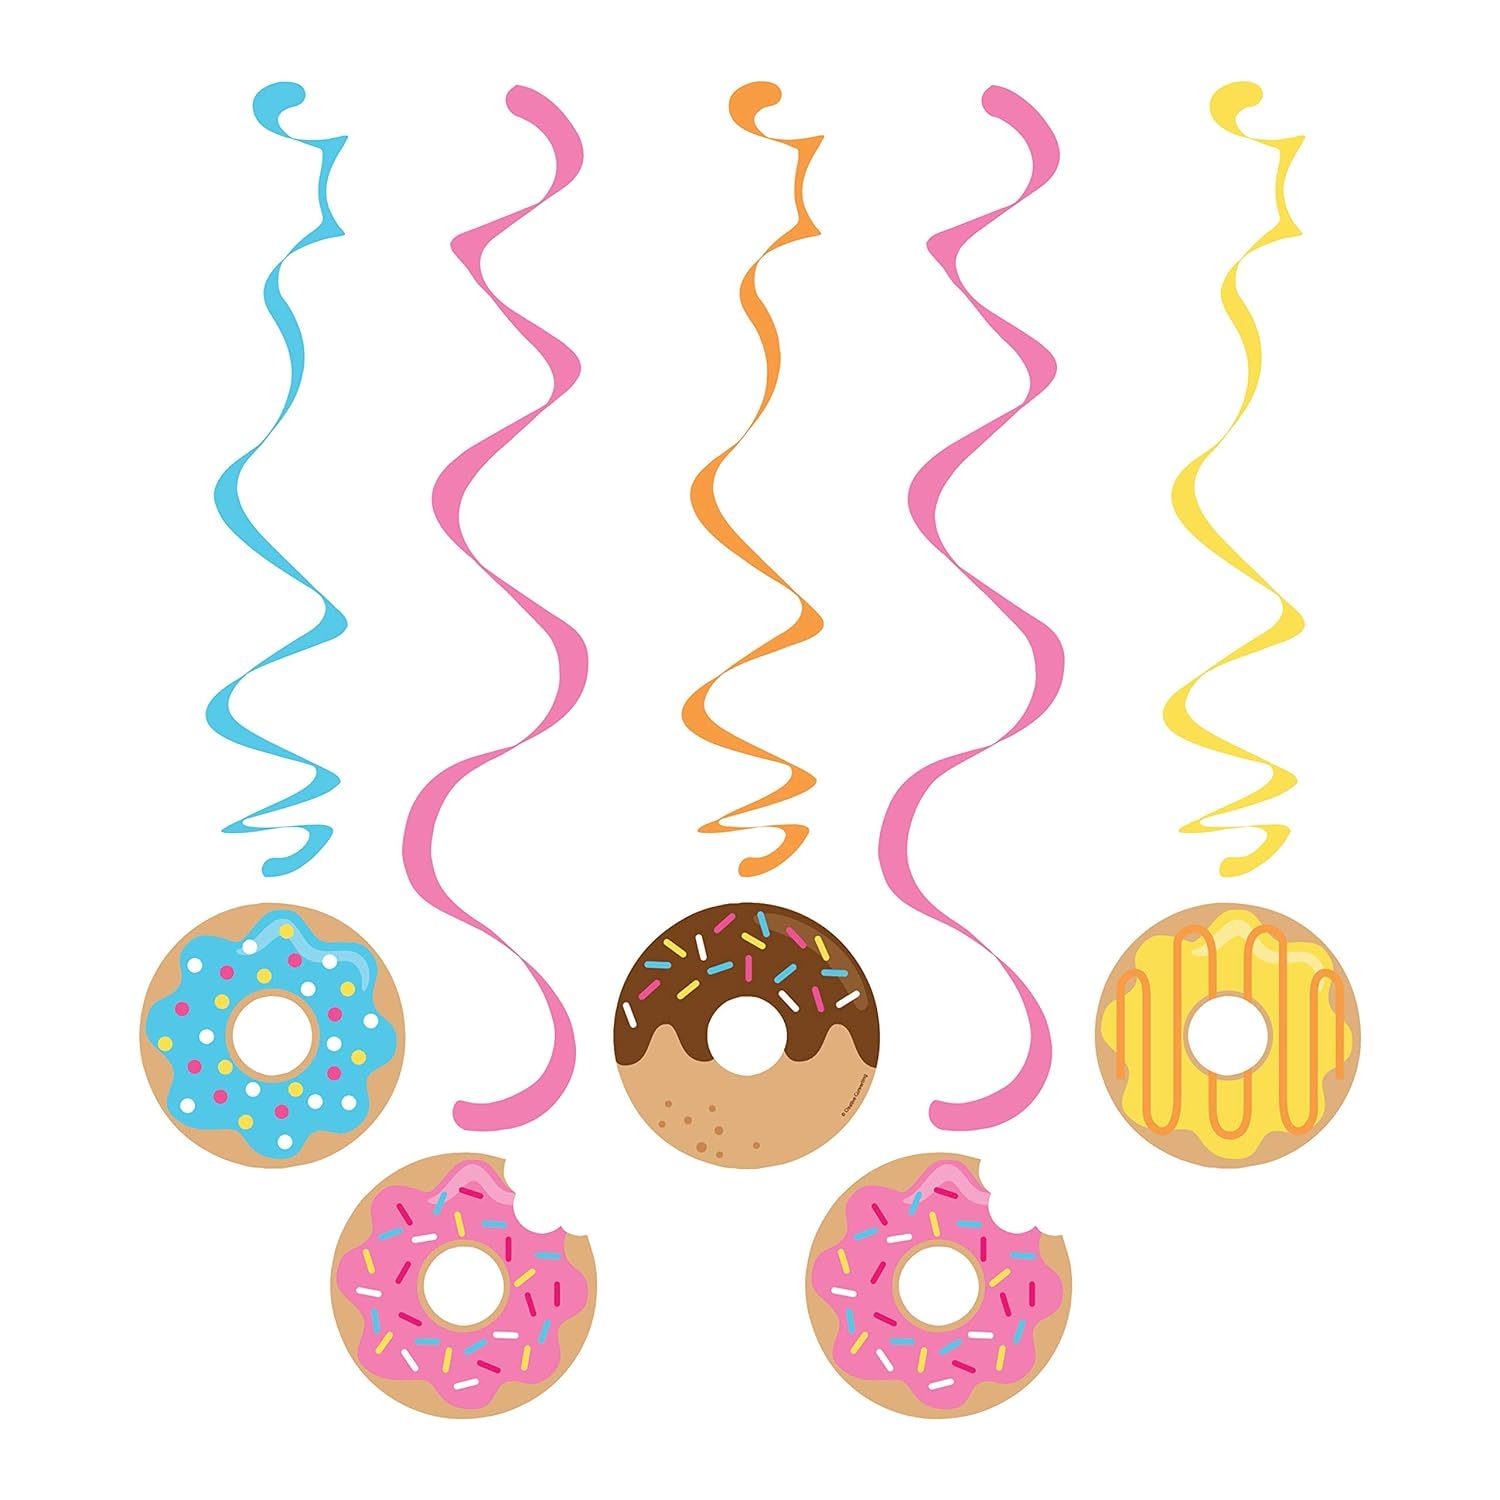 Primary image for Creative Converting - 324238 Creative Converting Donut Party Dizzy Danglers, Mul